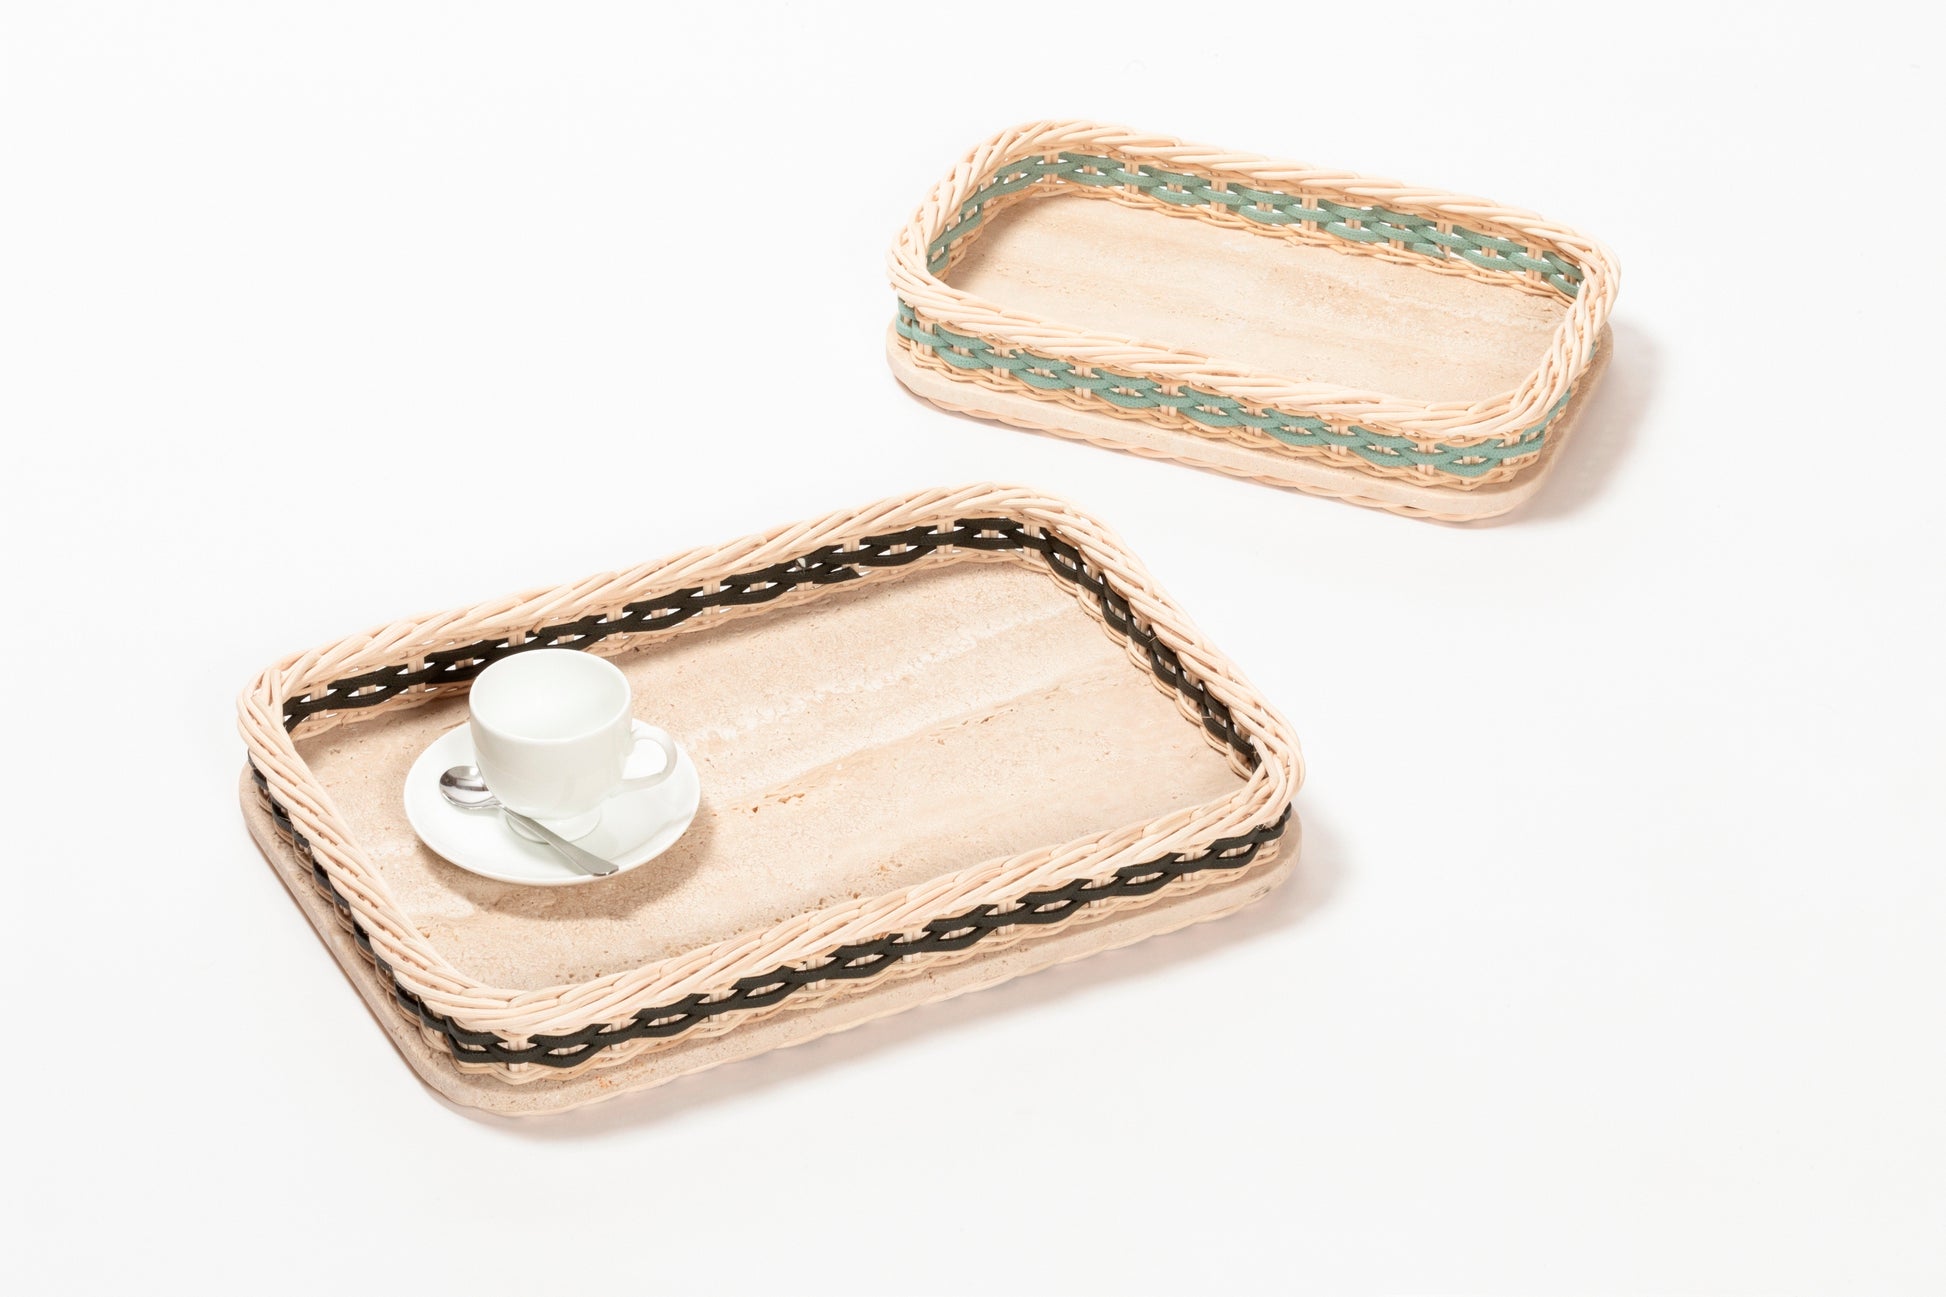 Pigment France Orsay Rectangular Travertine Tray | Luxury Home Accessories, Elegant Serving Trays & Gift Items | 2Jour Concierge, #1 luxury high-end gift & lifestyle shop